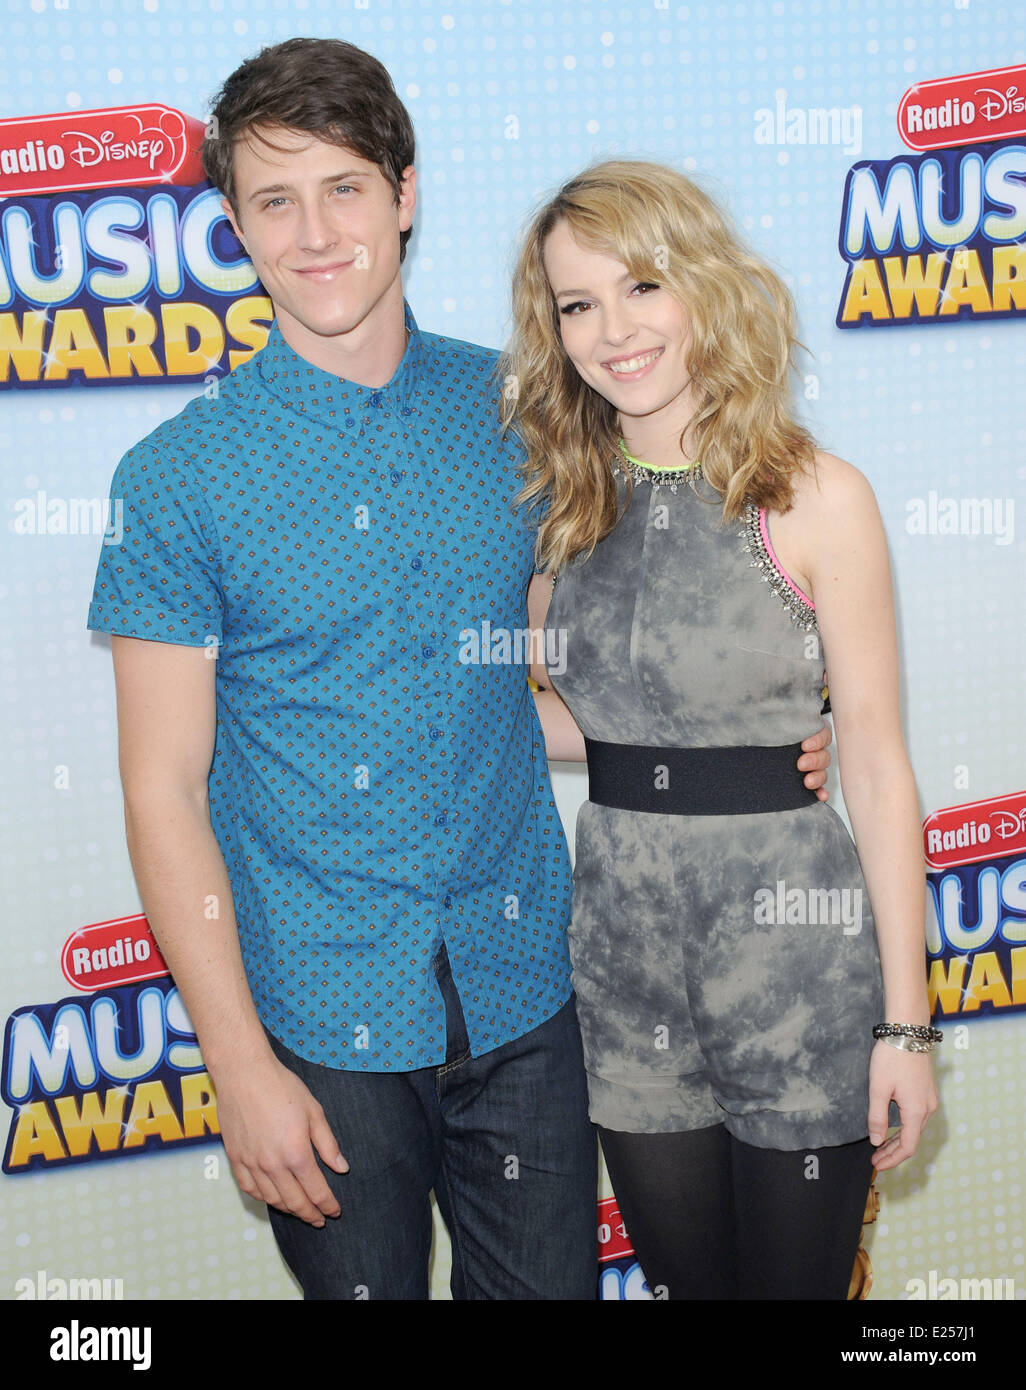 Radio Disney Music Awards 2013 at the Nokia Theater Featuring: BRIDGIT  MENDLER April 27,2013 Where: Los Angeles, California, United States When:  27 Apr 2013 Stock Photo - Alamy